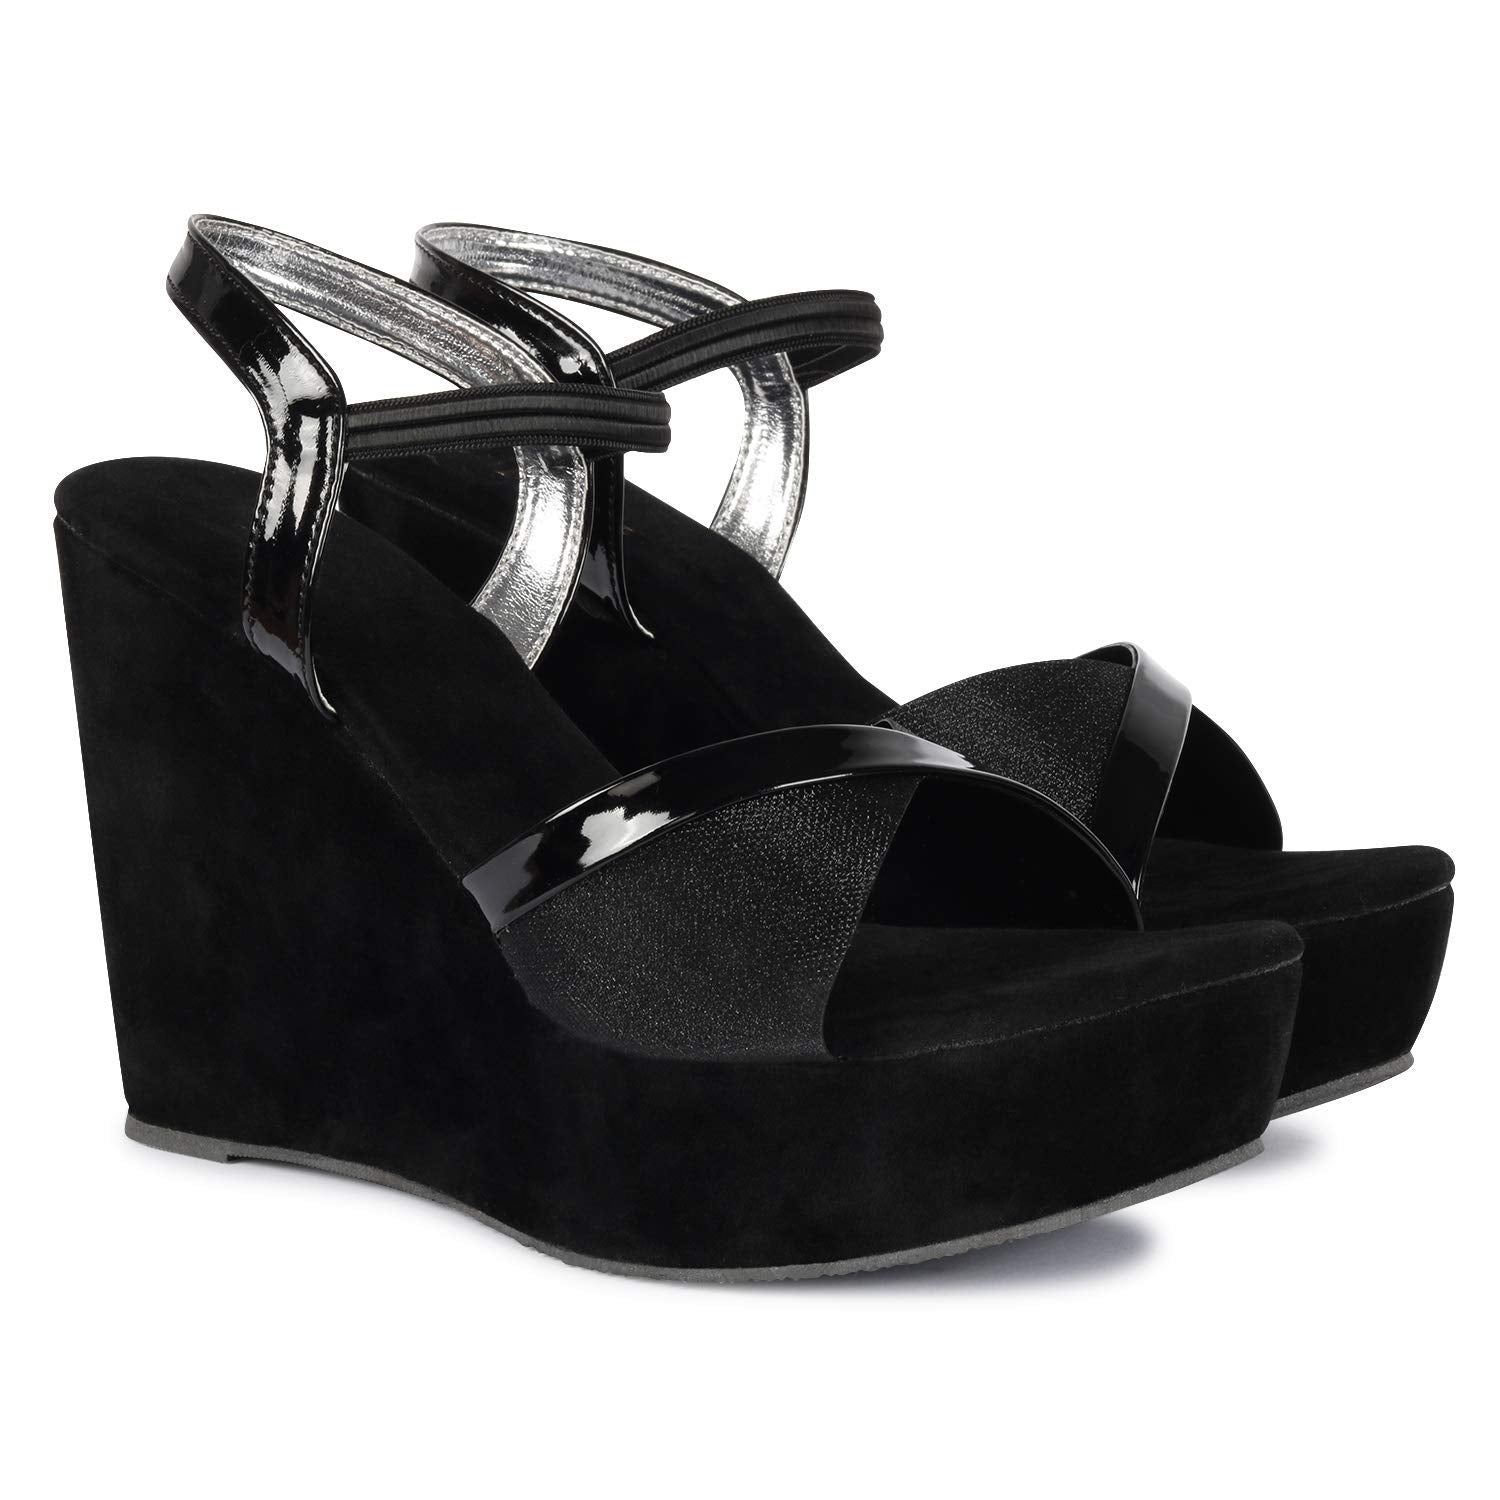 ZAPATOZ Women Wedge Heel Sandal -  Fashion Sandals in Sri Lanka from Arcade Online Shopping - Just Rs. 5099!